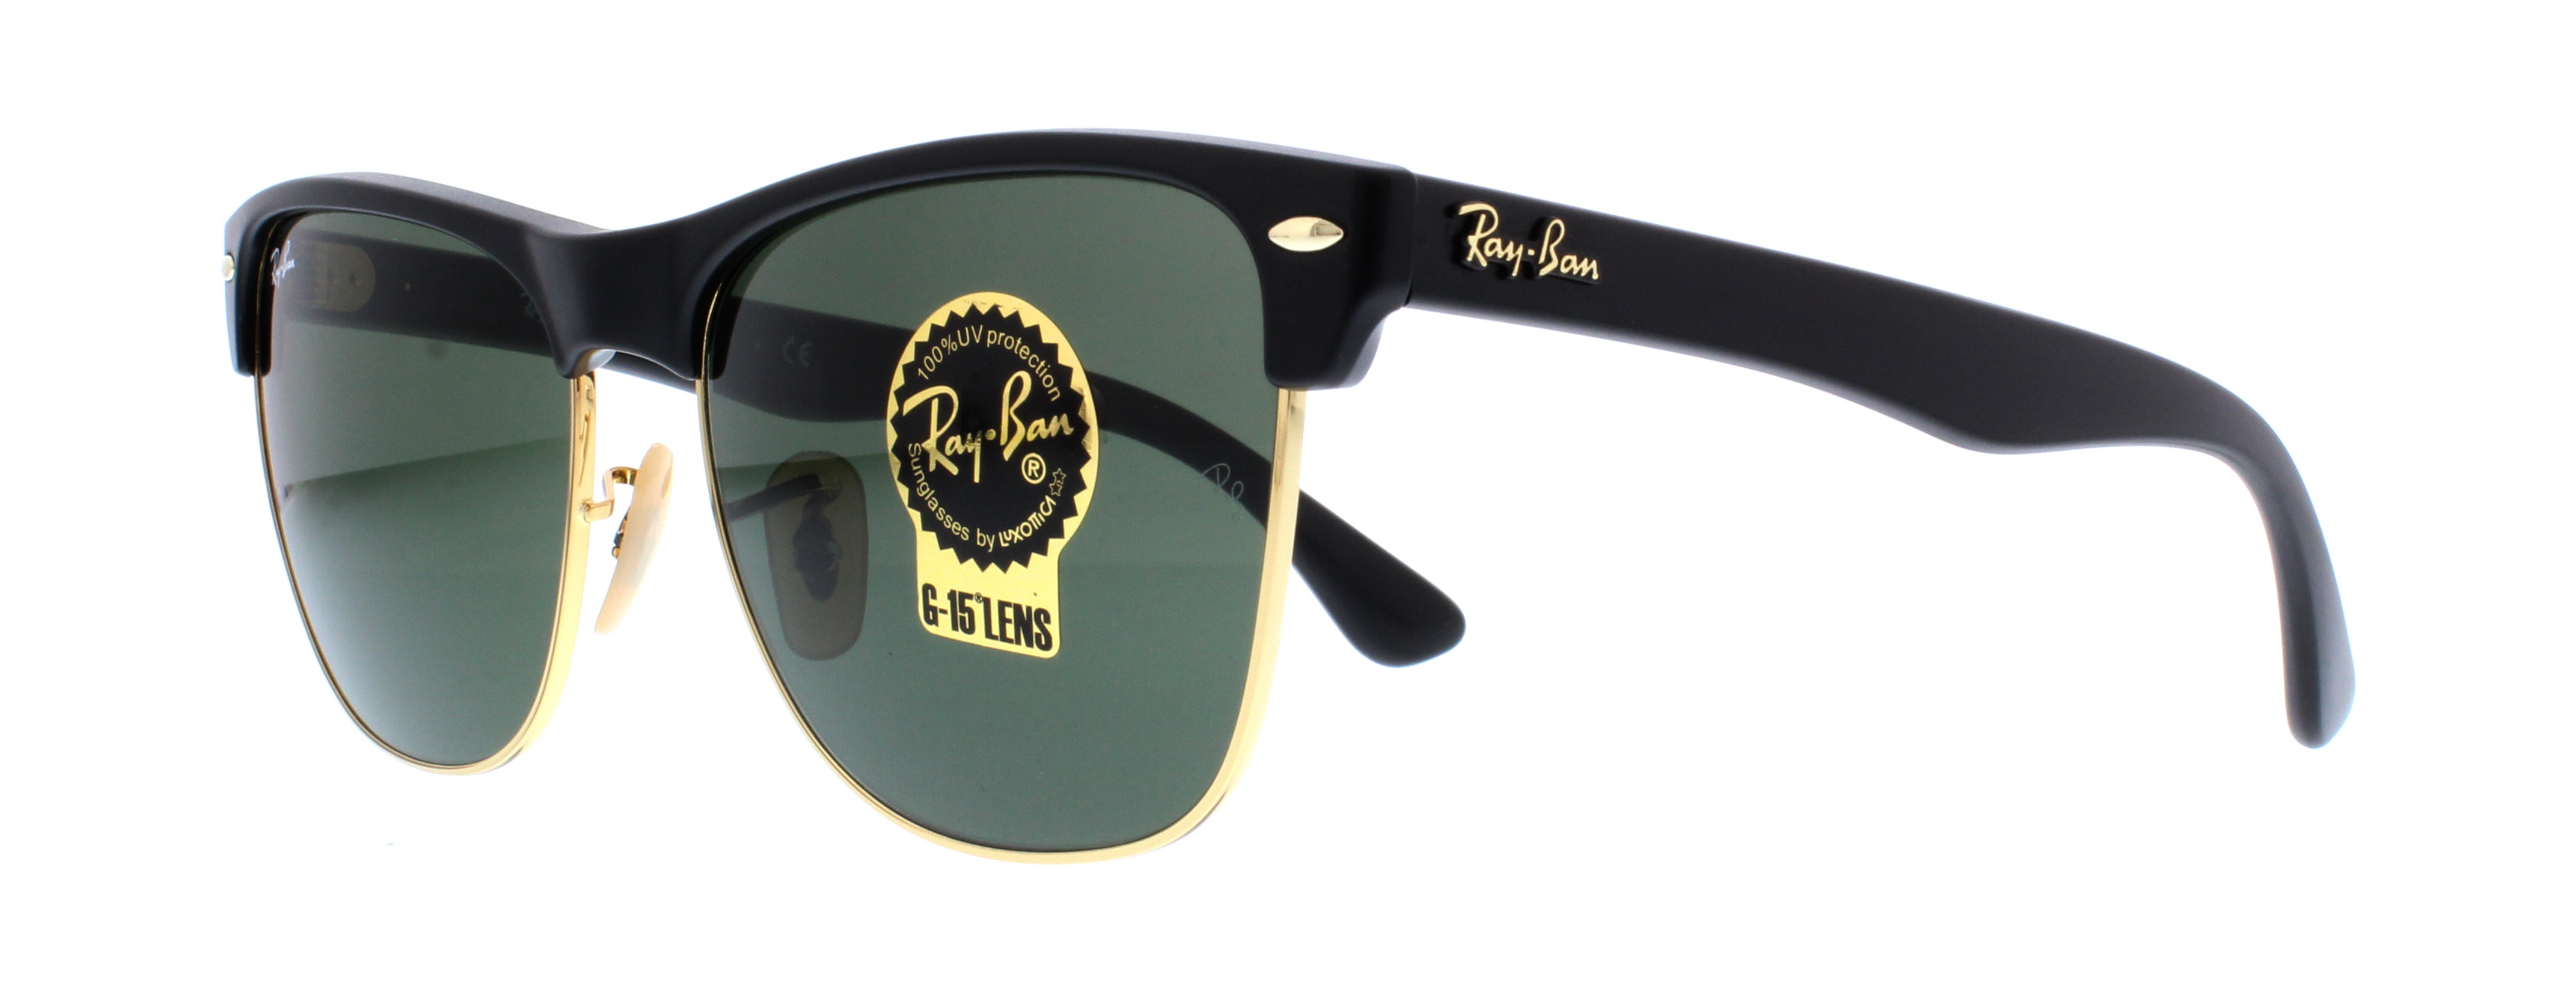 Designer Frames Outlet. Ray Ban Sunglasses RB4175 Clubmaster Oversized